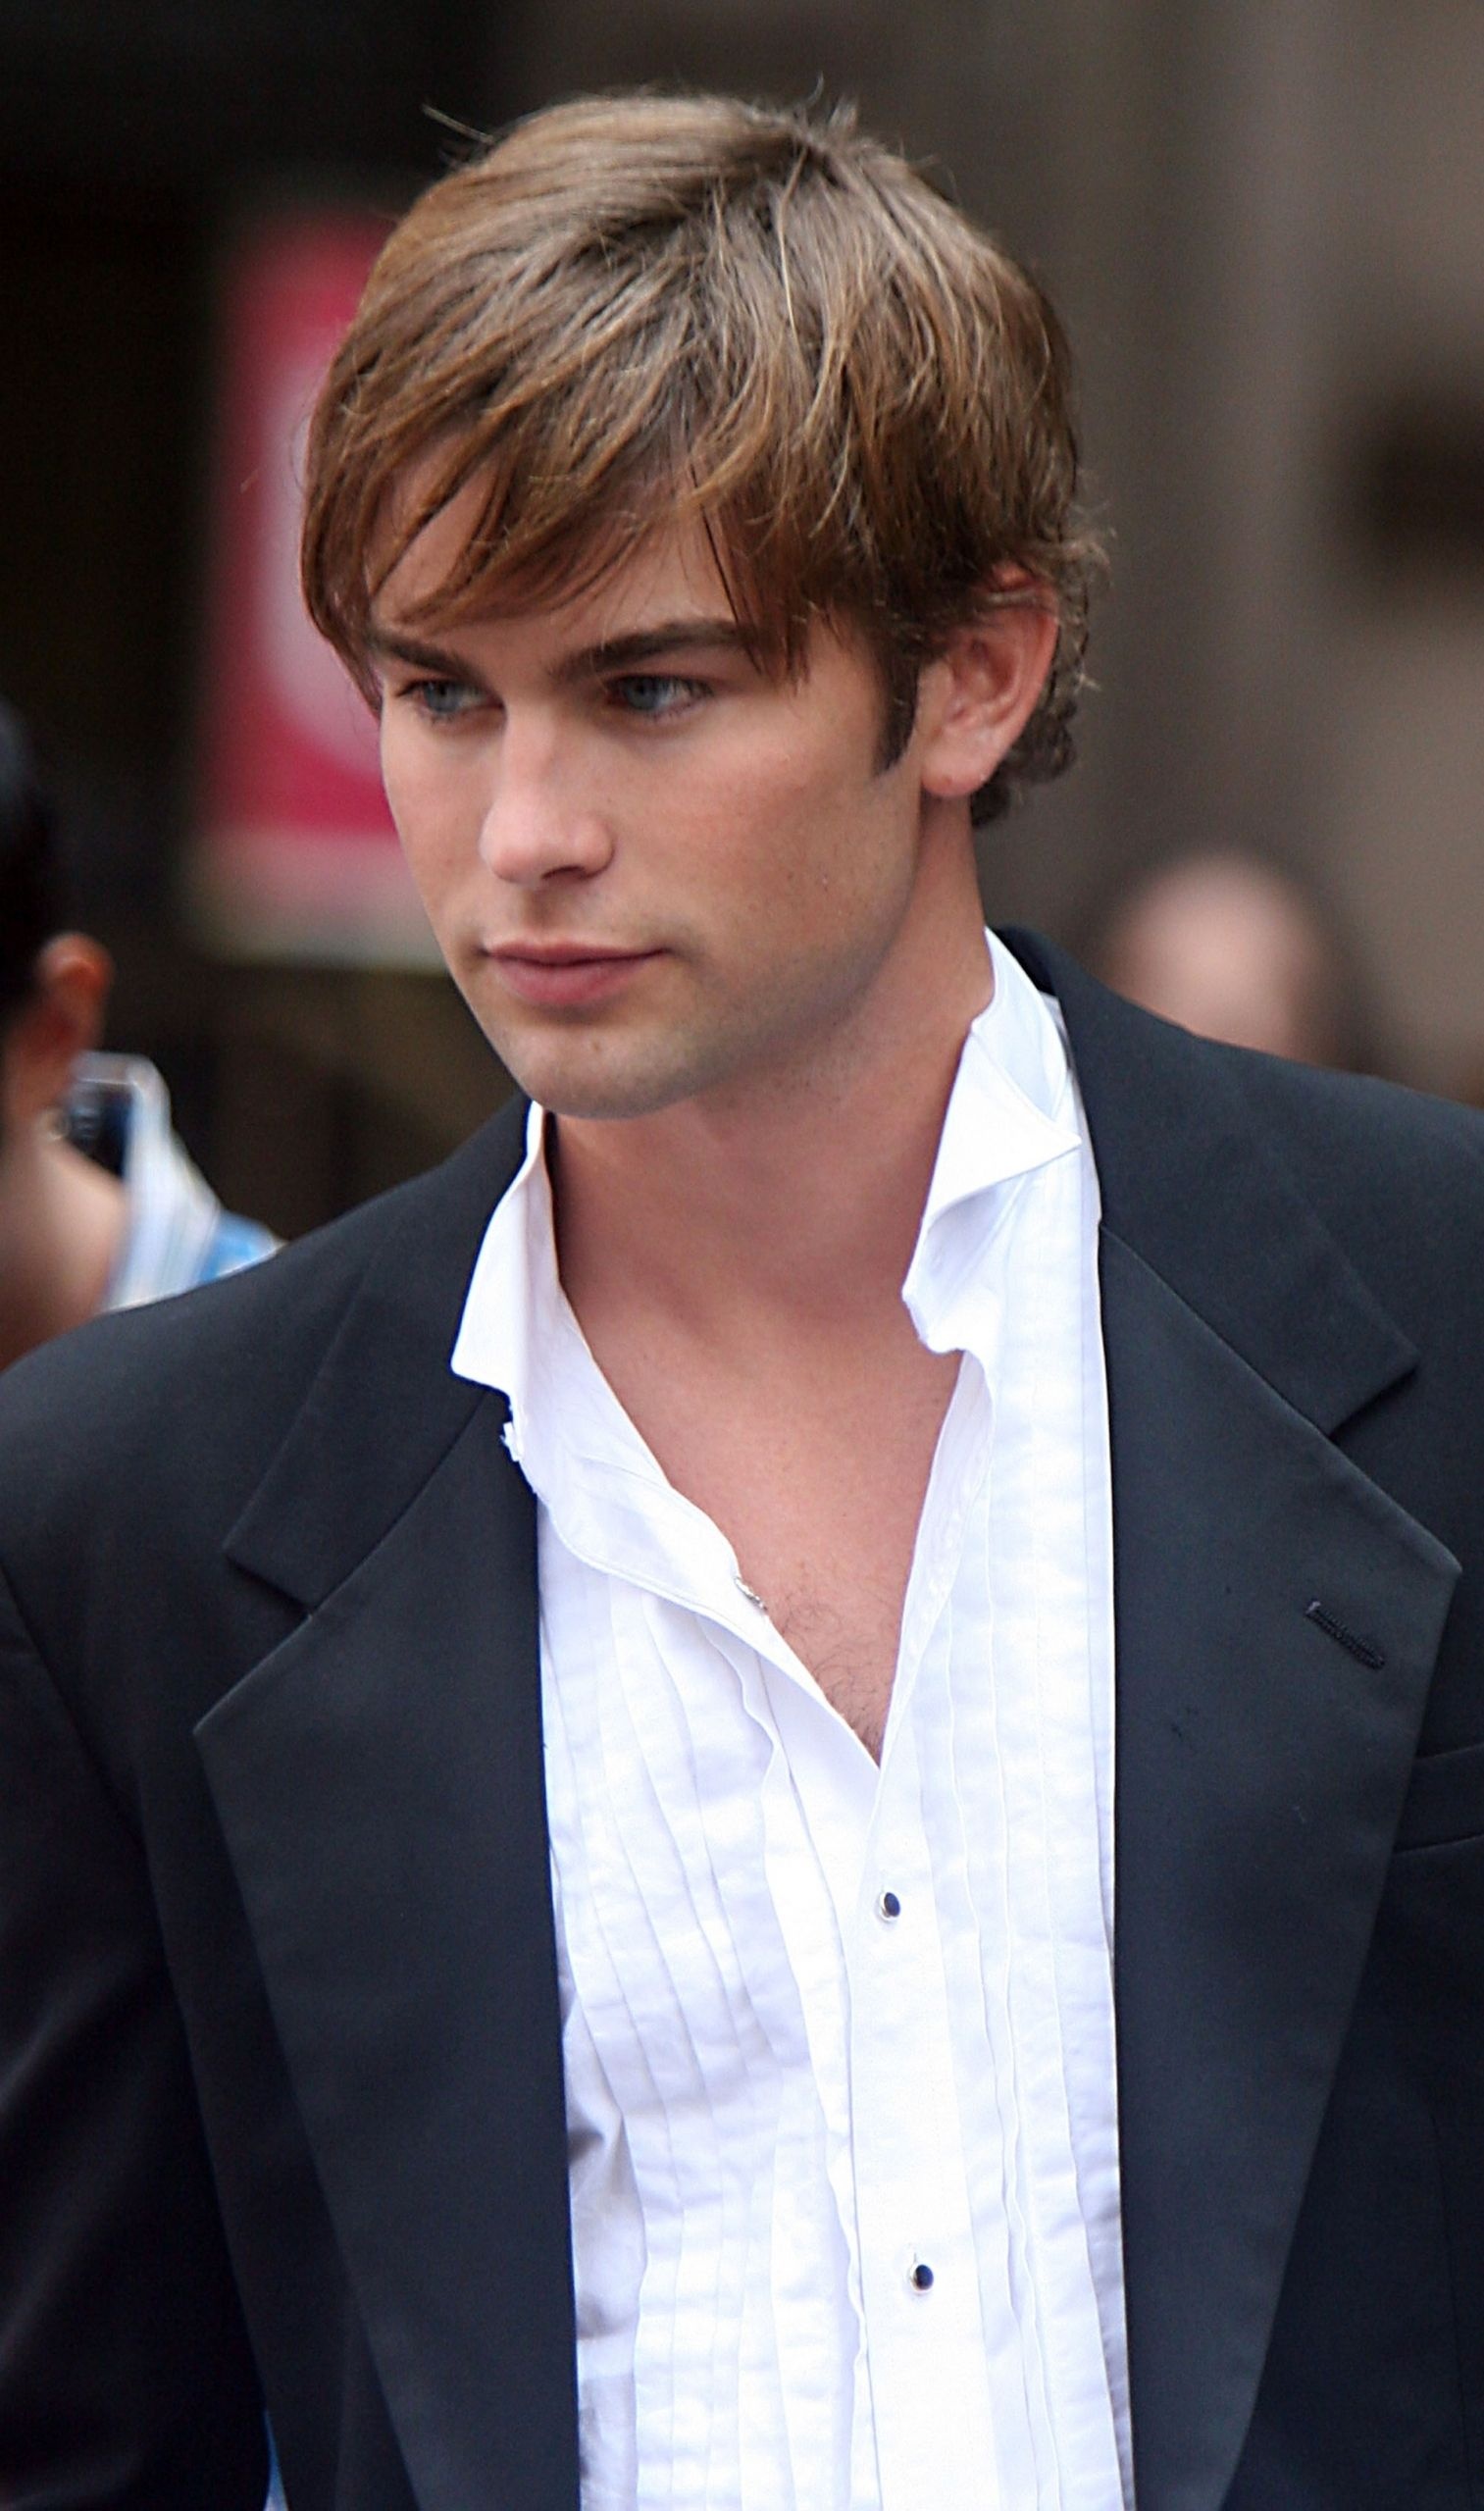 Chace Crawford: Nate Archibald, Gossip Girl TV series primary character, The CW network. 1520x2560 HD Wallpaper.